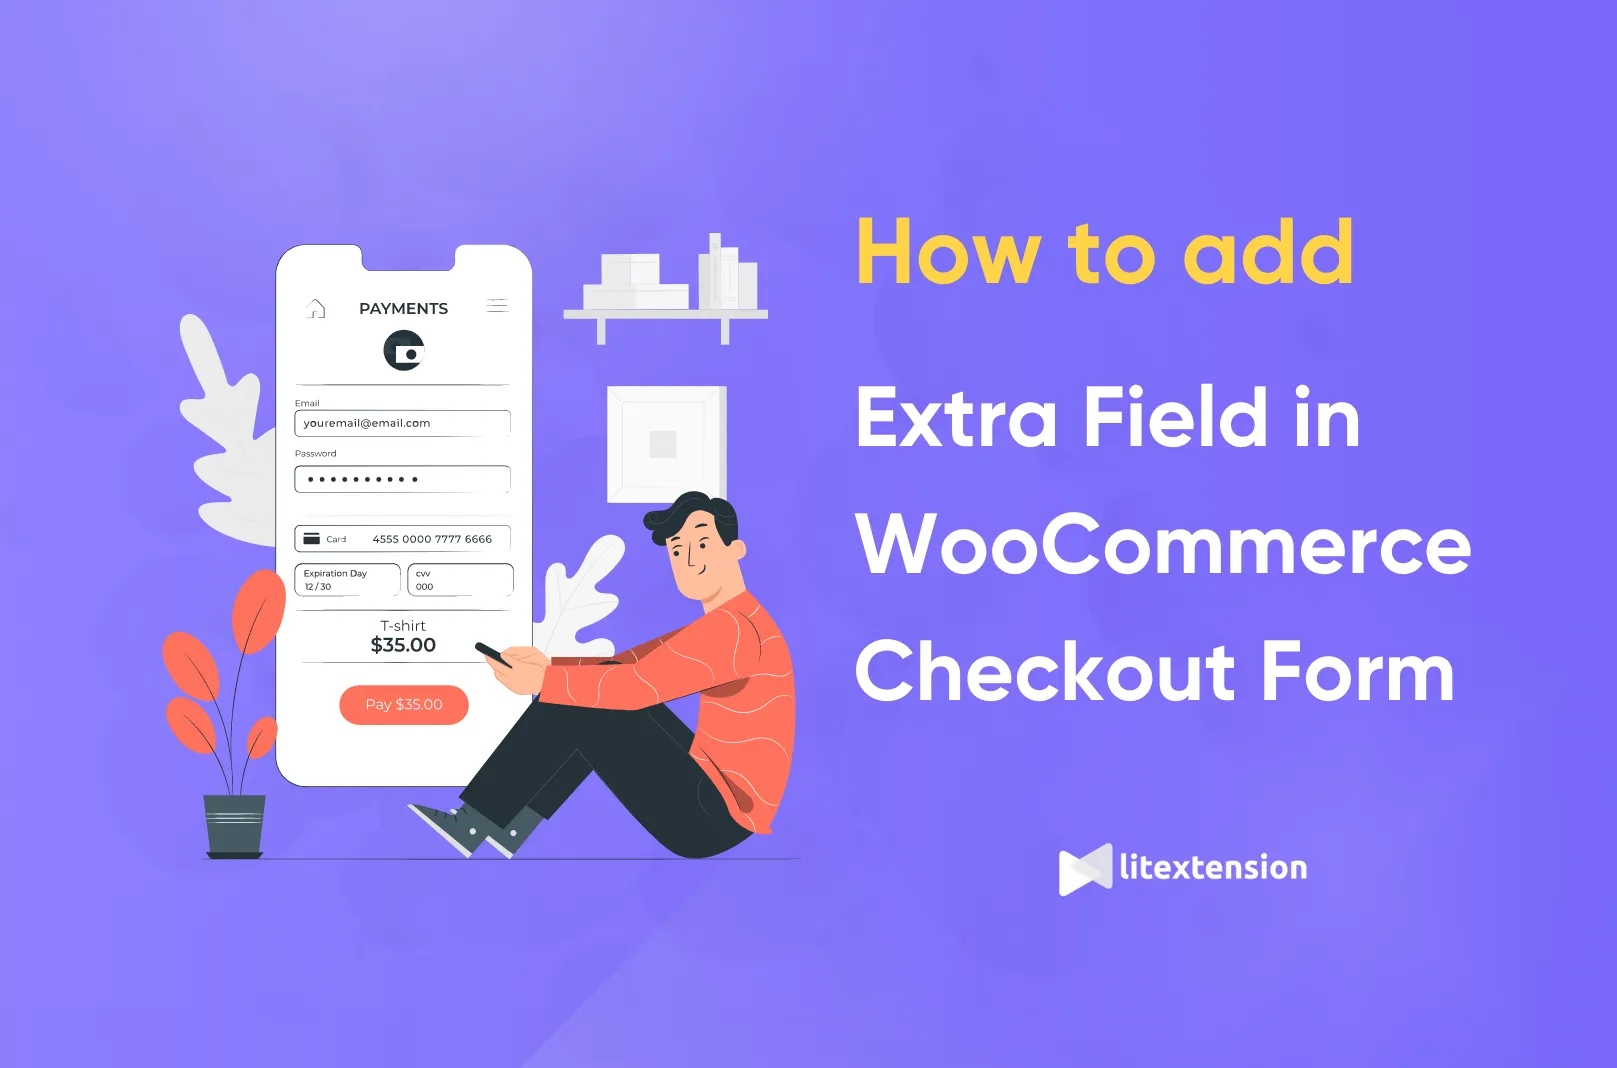 The comprehensive guide to Woocommerce checkout page